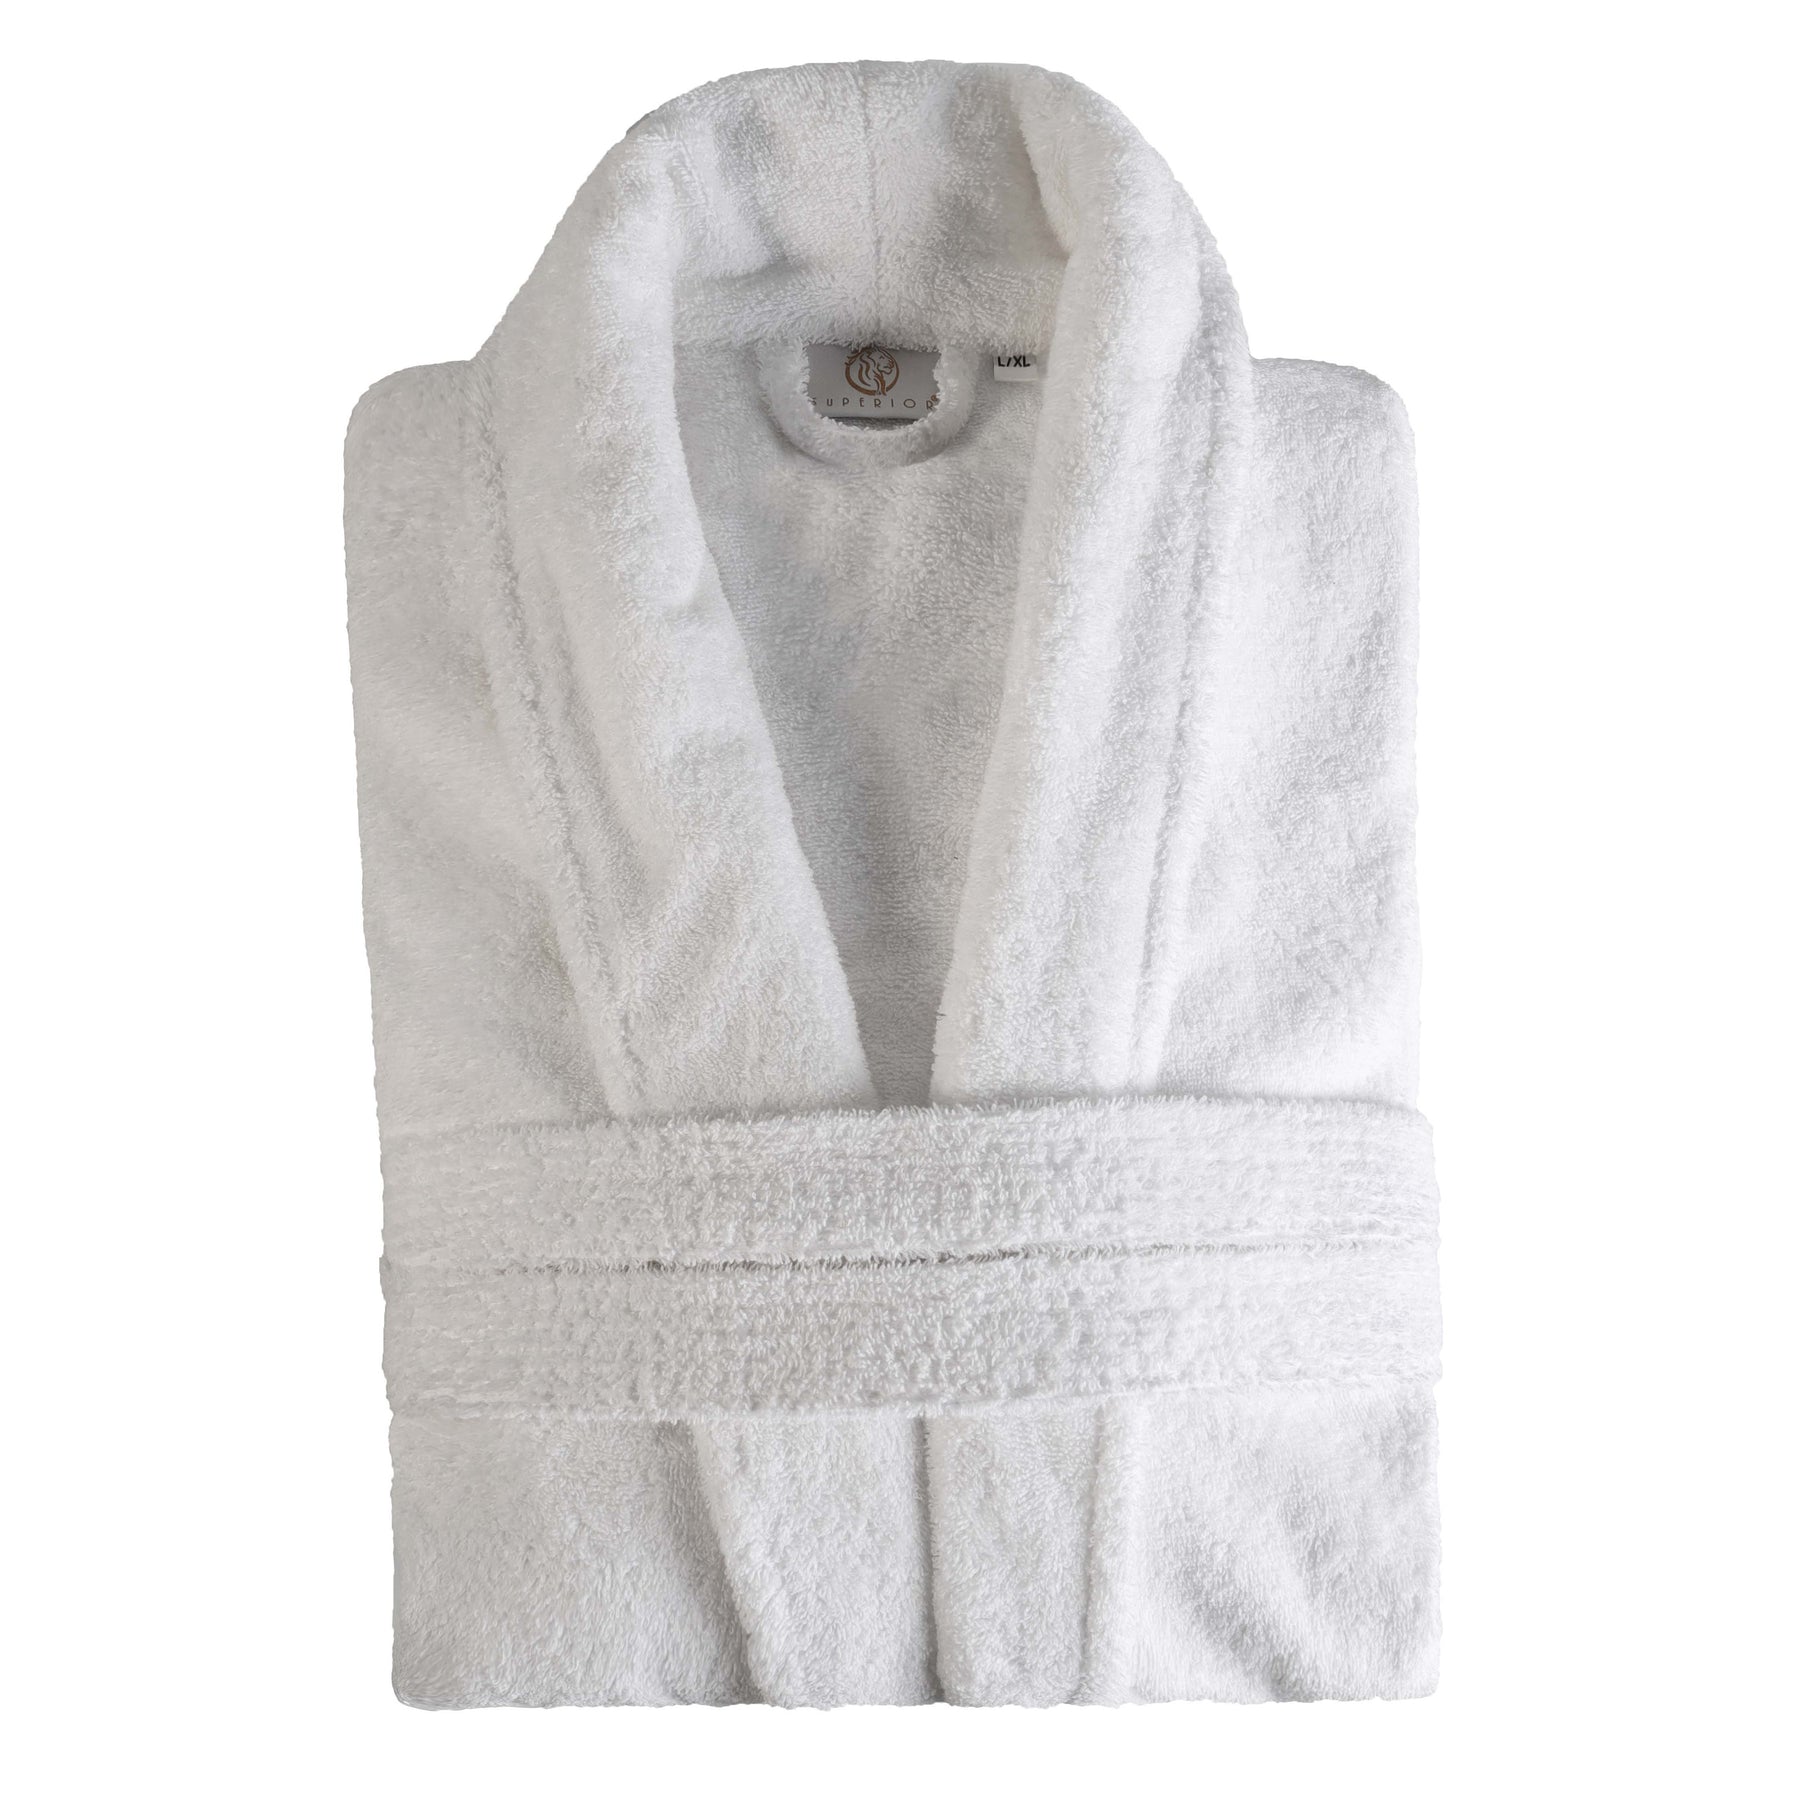 Classic Men's Home and Bath Collection Traditional Turkish Cotton Cozy Bathrobe with Adjustable Belt and Hanging Loop - White